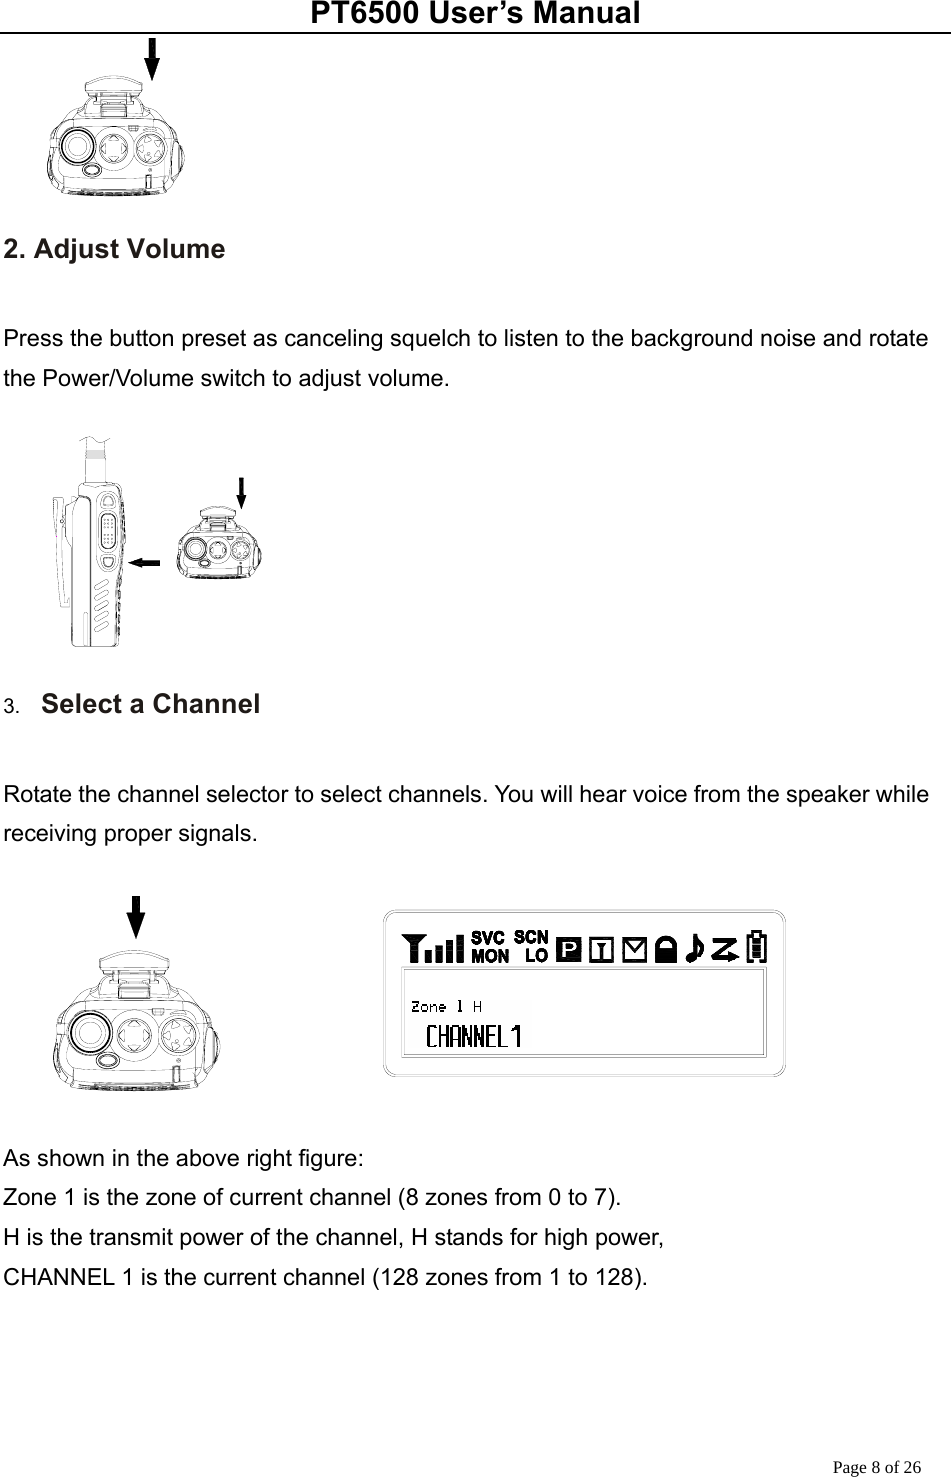 PT6500 User’s Manual Page 8 of 26  2. Adjust Volume  Press the button preset as canceling squelch to listen to the background noise and rotate the Power/Volume switch to adjust volume.   3.  Select a Channel  Rotate the channel selector to select channels. You will hear voice from the speaker while receiving proper signals.    As shown in the above right figure: Zone 1 is the zone of current channel (8 zones from 0 to 7). H is the transmit power of the channel, H stands for high power,   CHANNEL 1 is the current channel (128 zones from 1 to 128).       